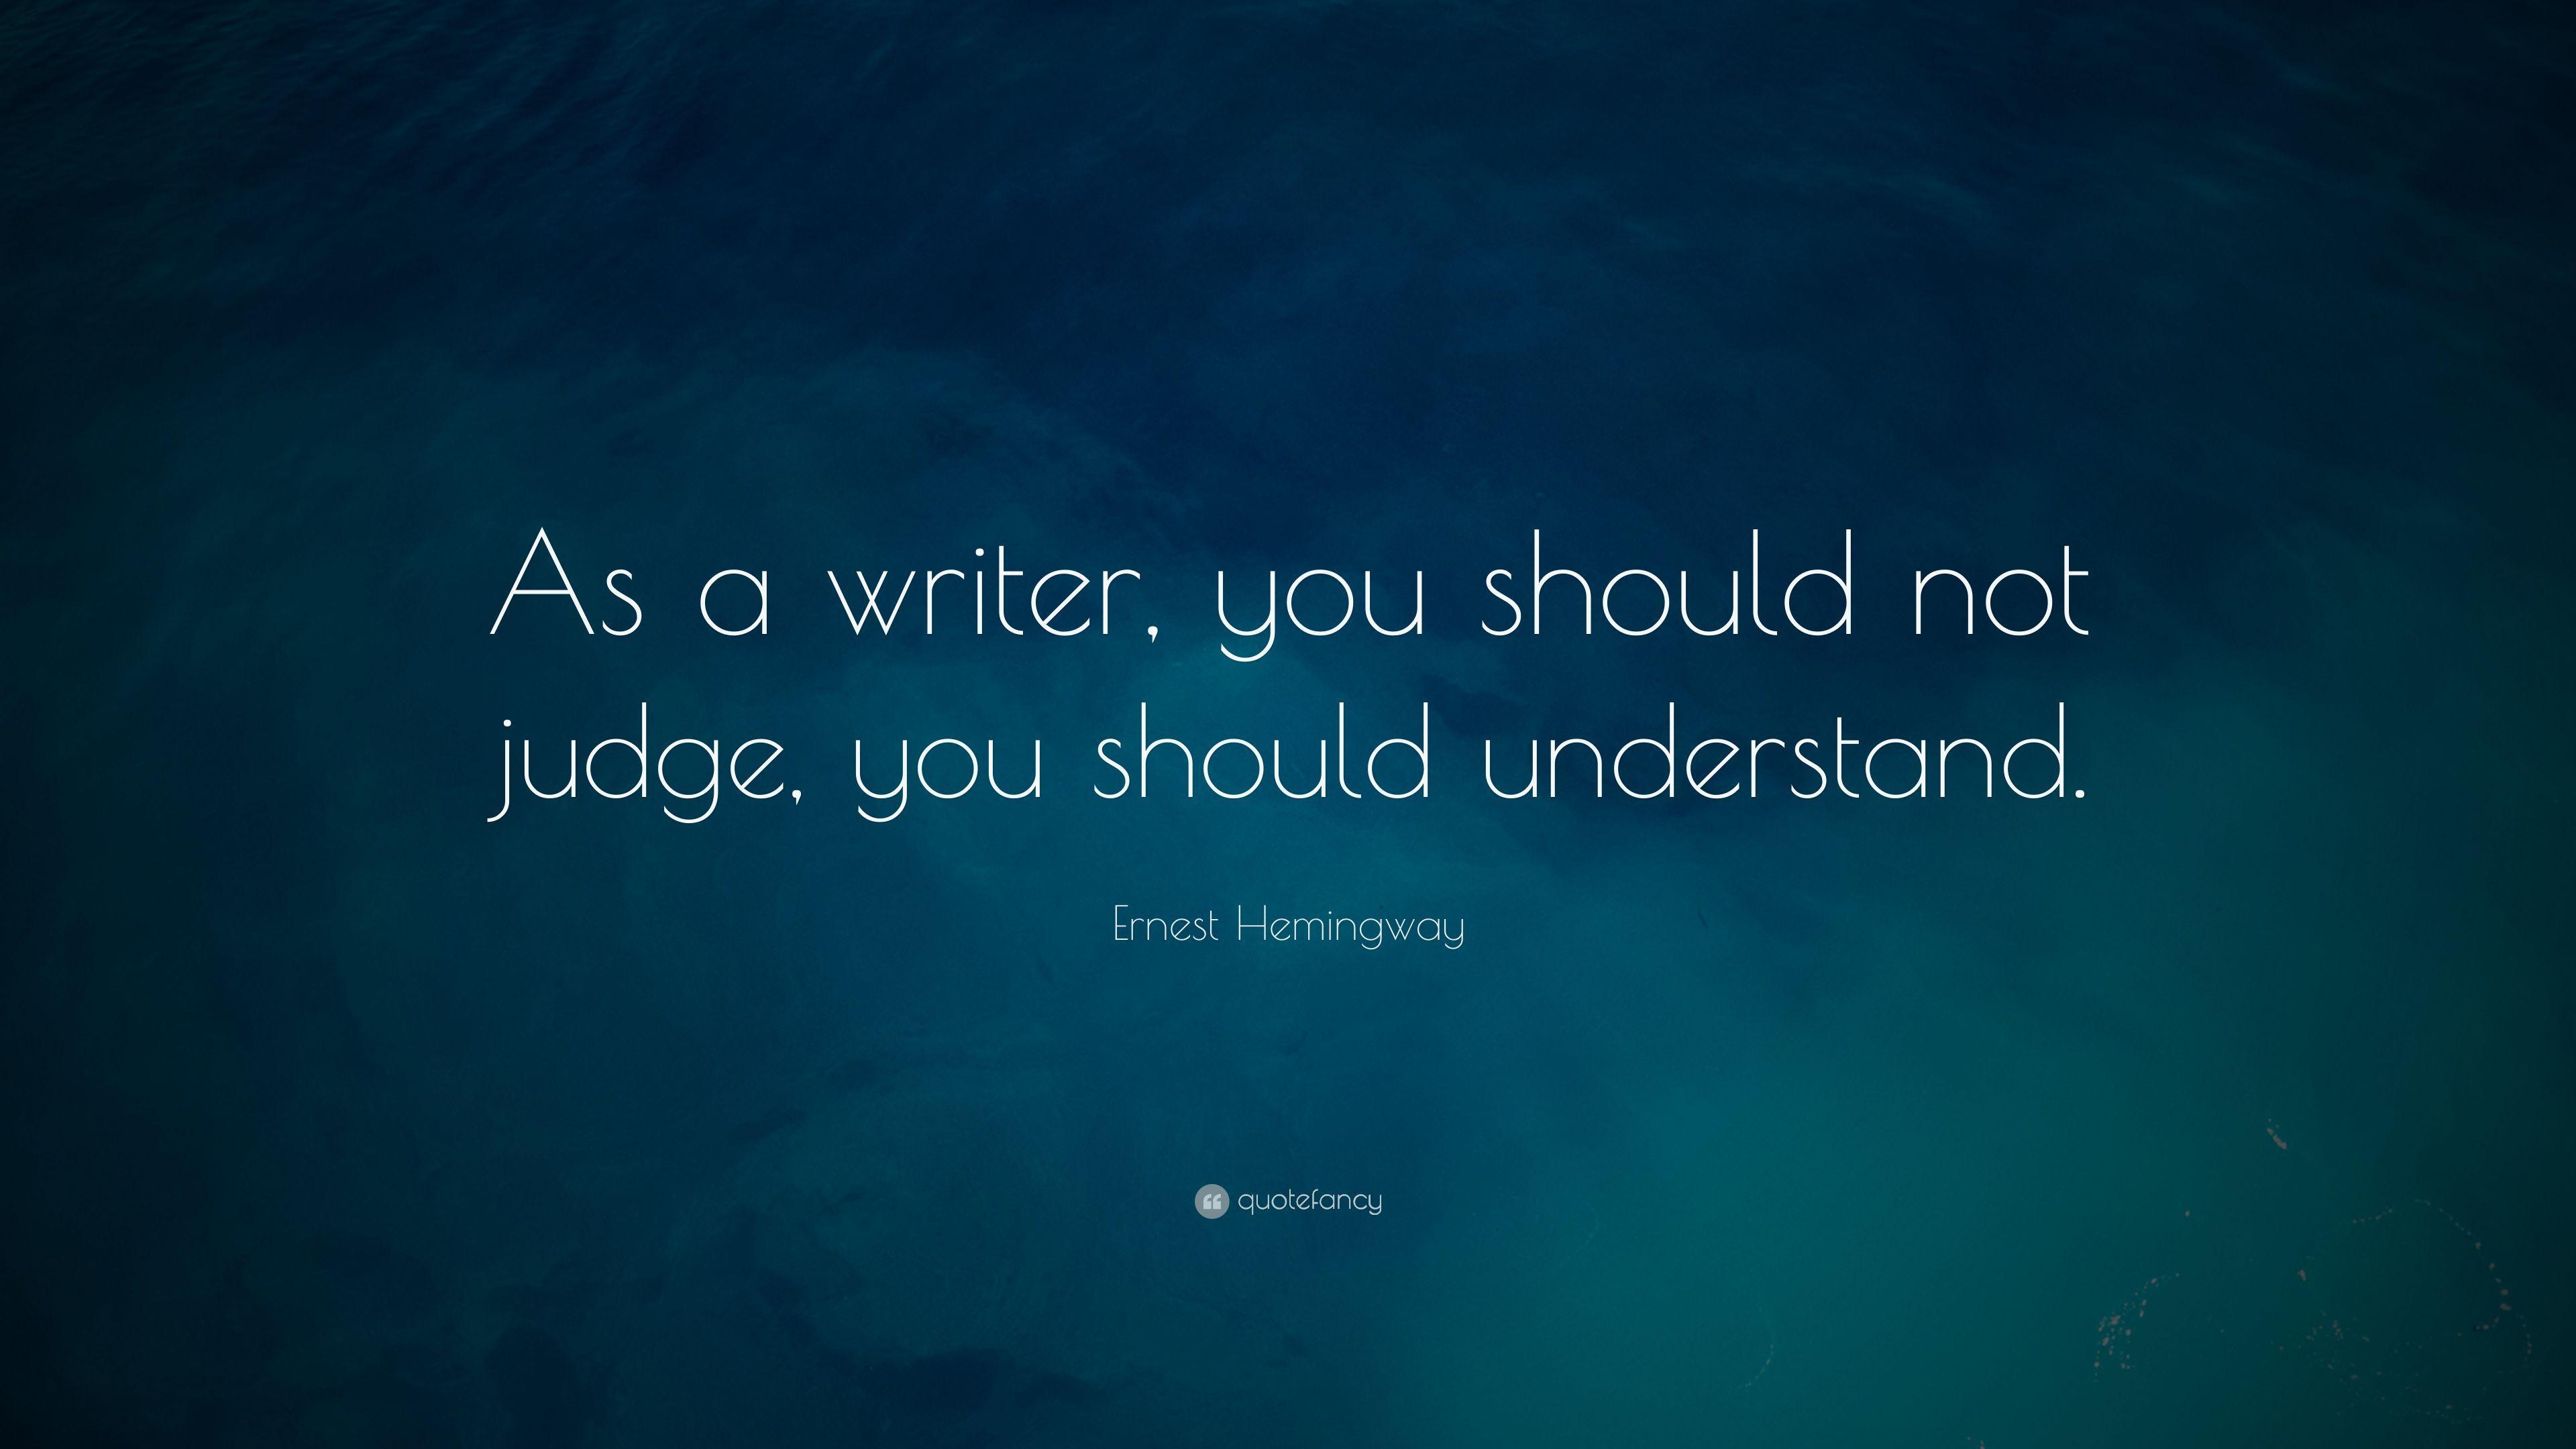 Ernest Hemingway Quote: “As a writer, you should not judge, you